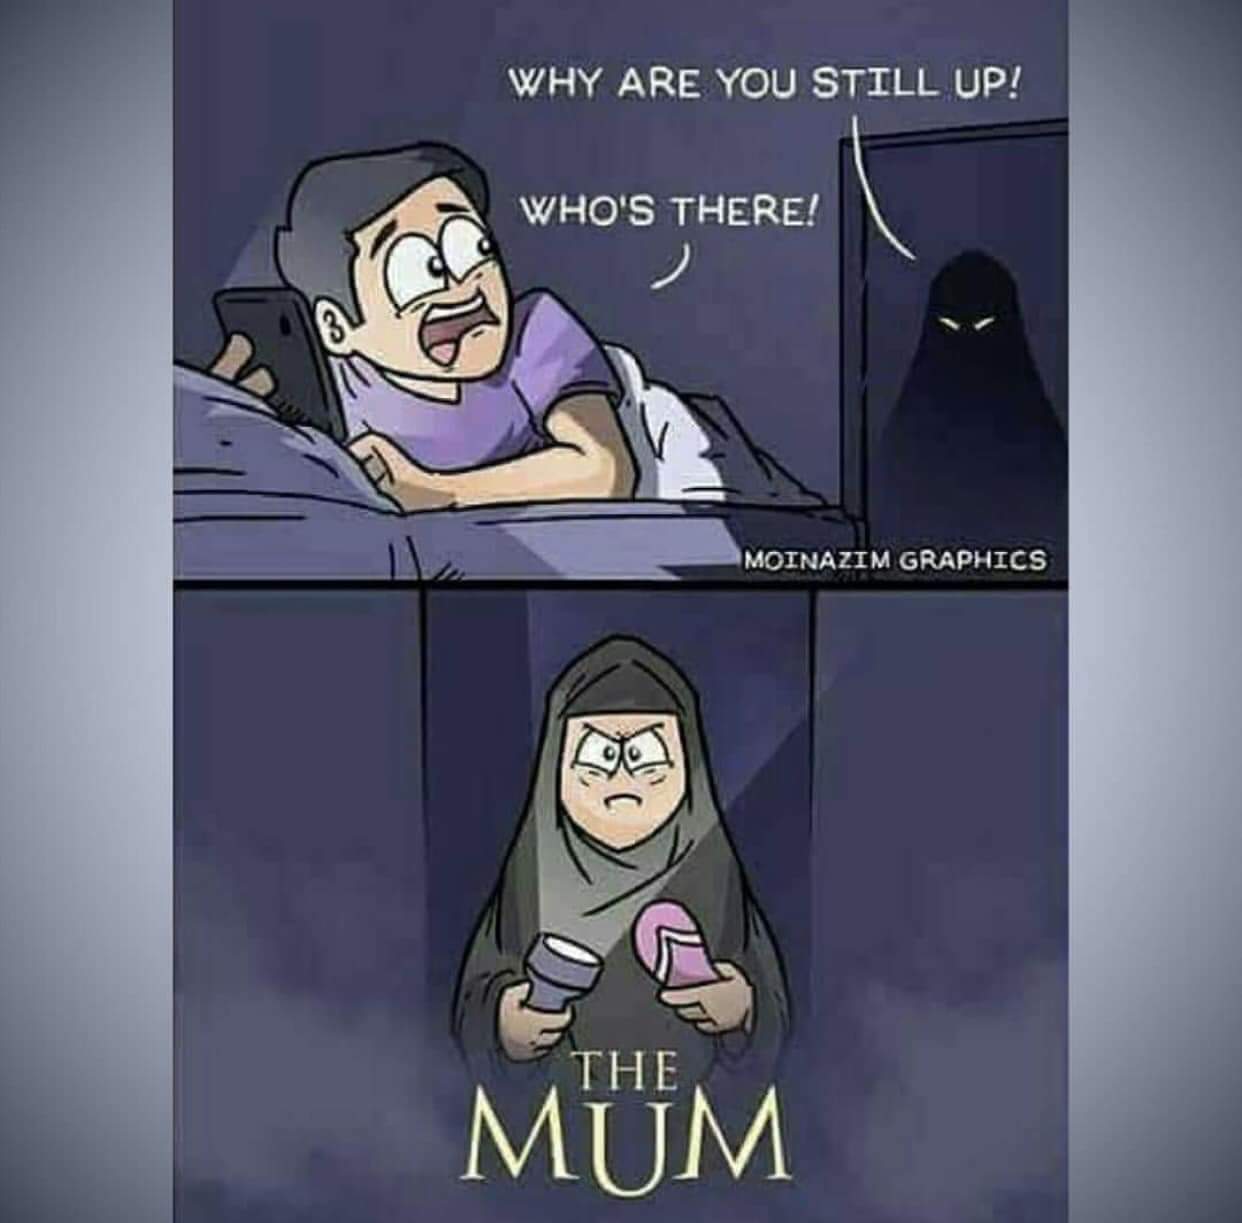 Here comes the MUM - meme